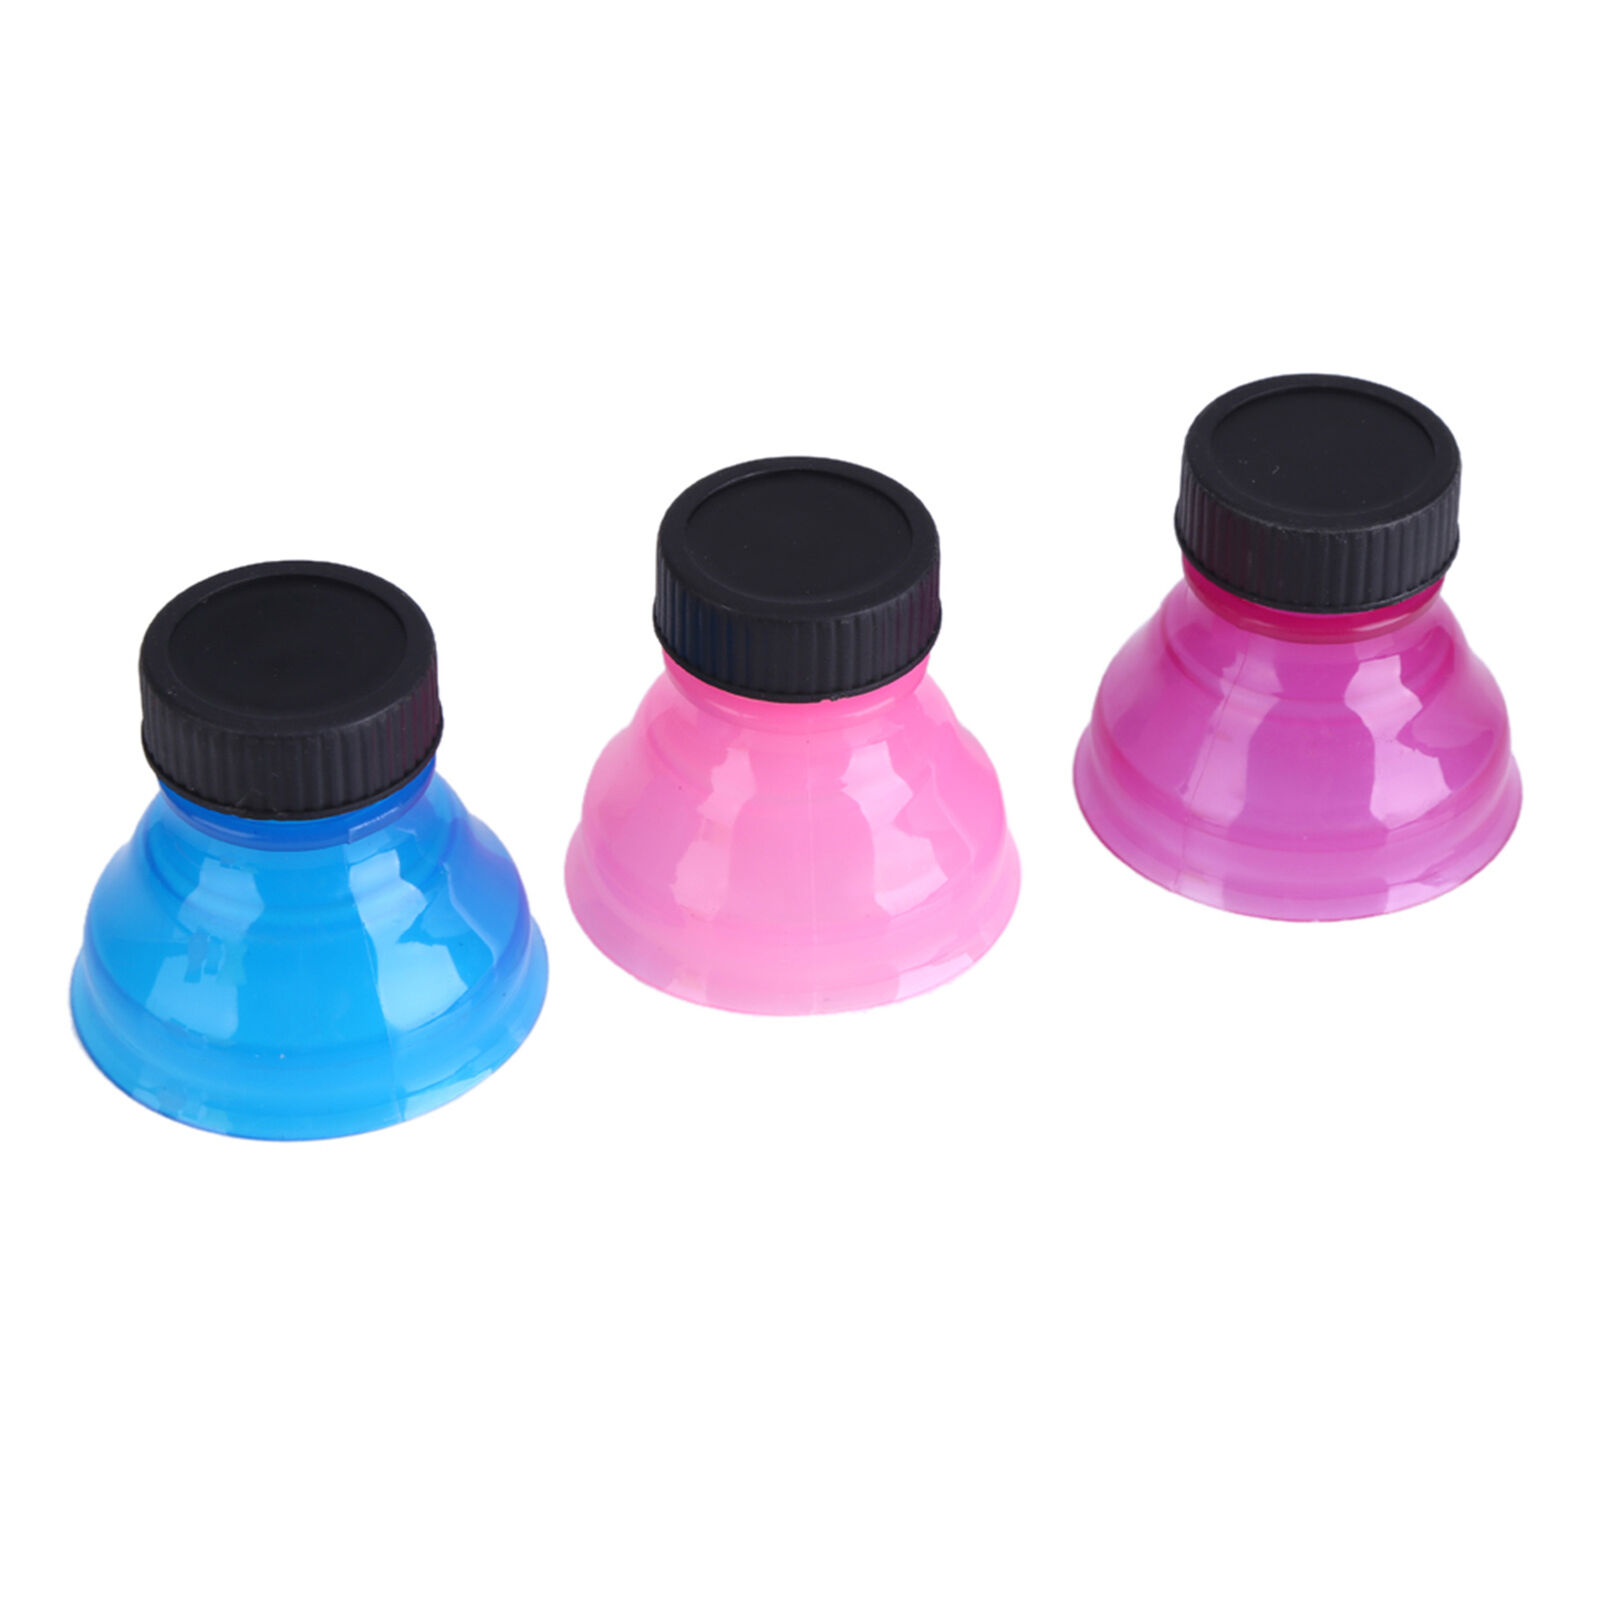 6Pcs Bottle Caps Reusable Bottle Caps For Cool Soda Drink Drink Unbranded Does not apply - фотография #15